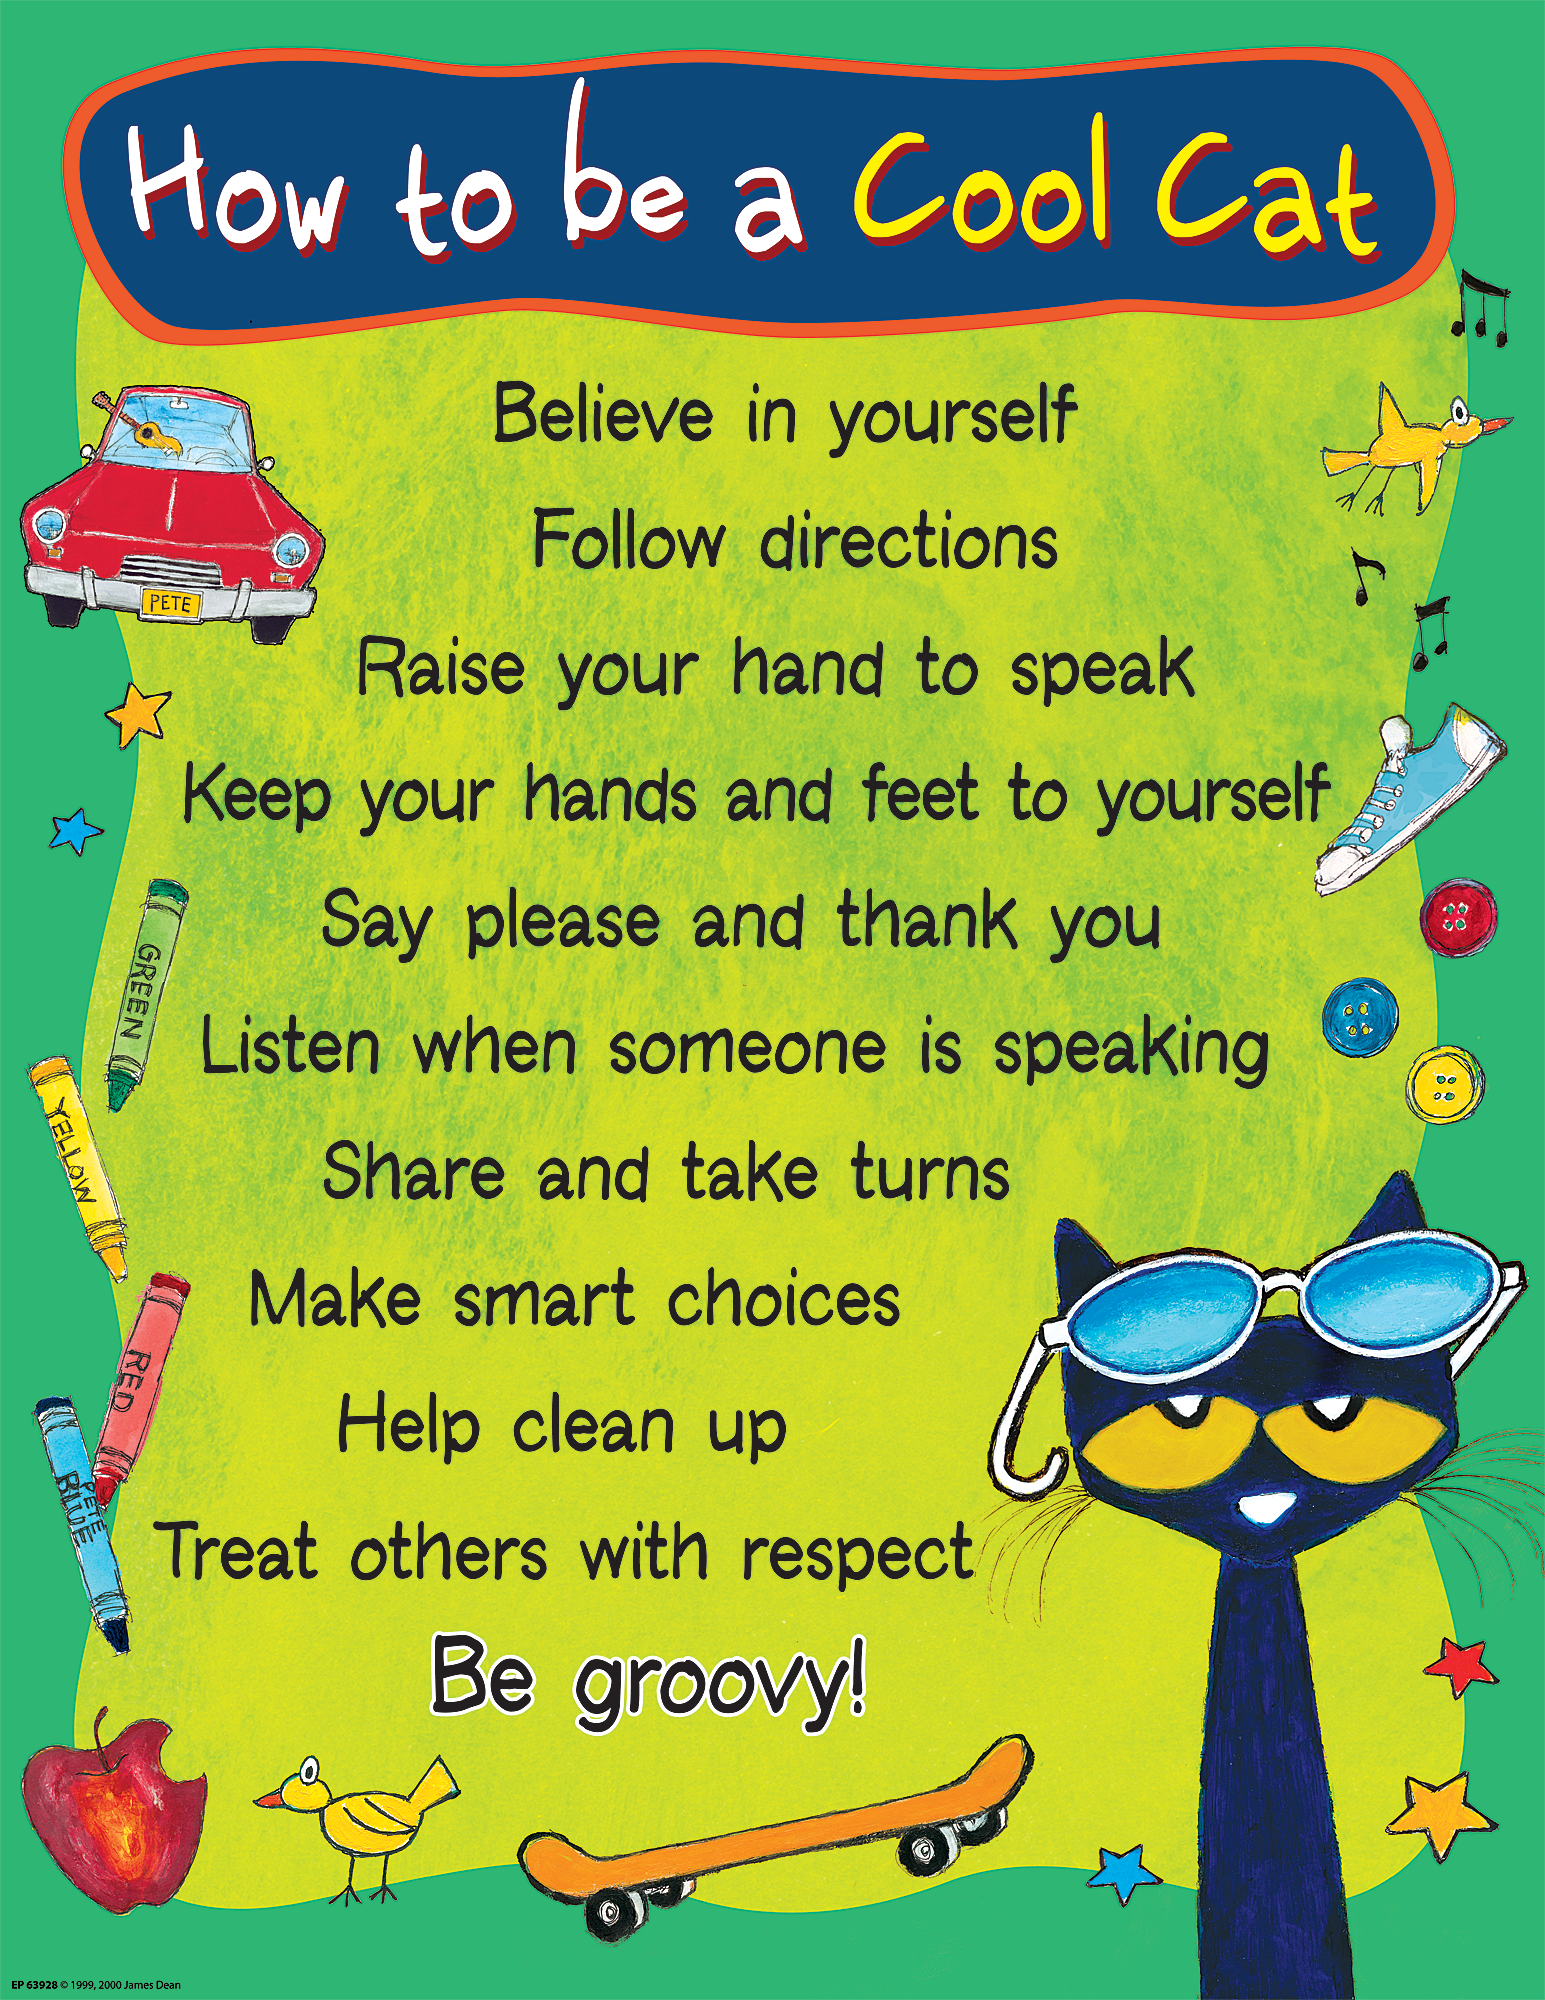 Pete the CatÂ® How to be a Cool Cat Chart